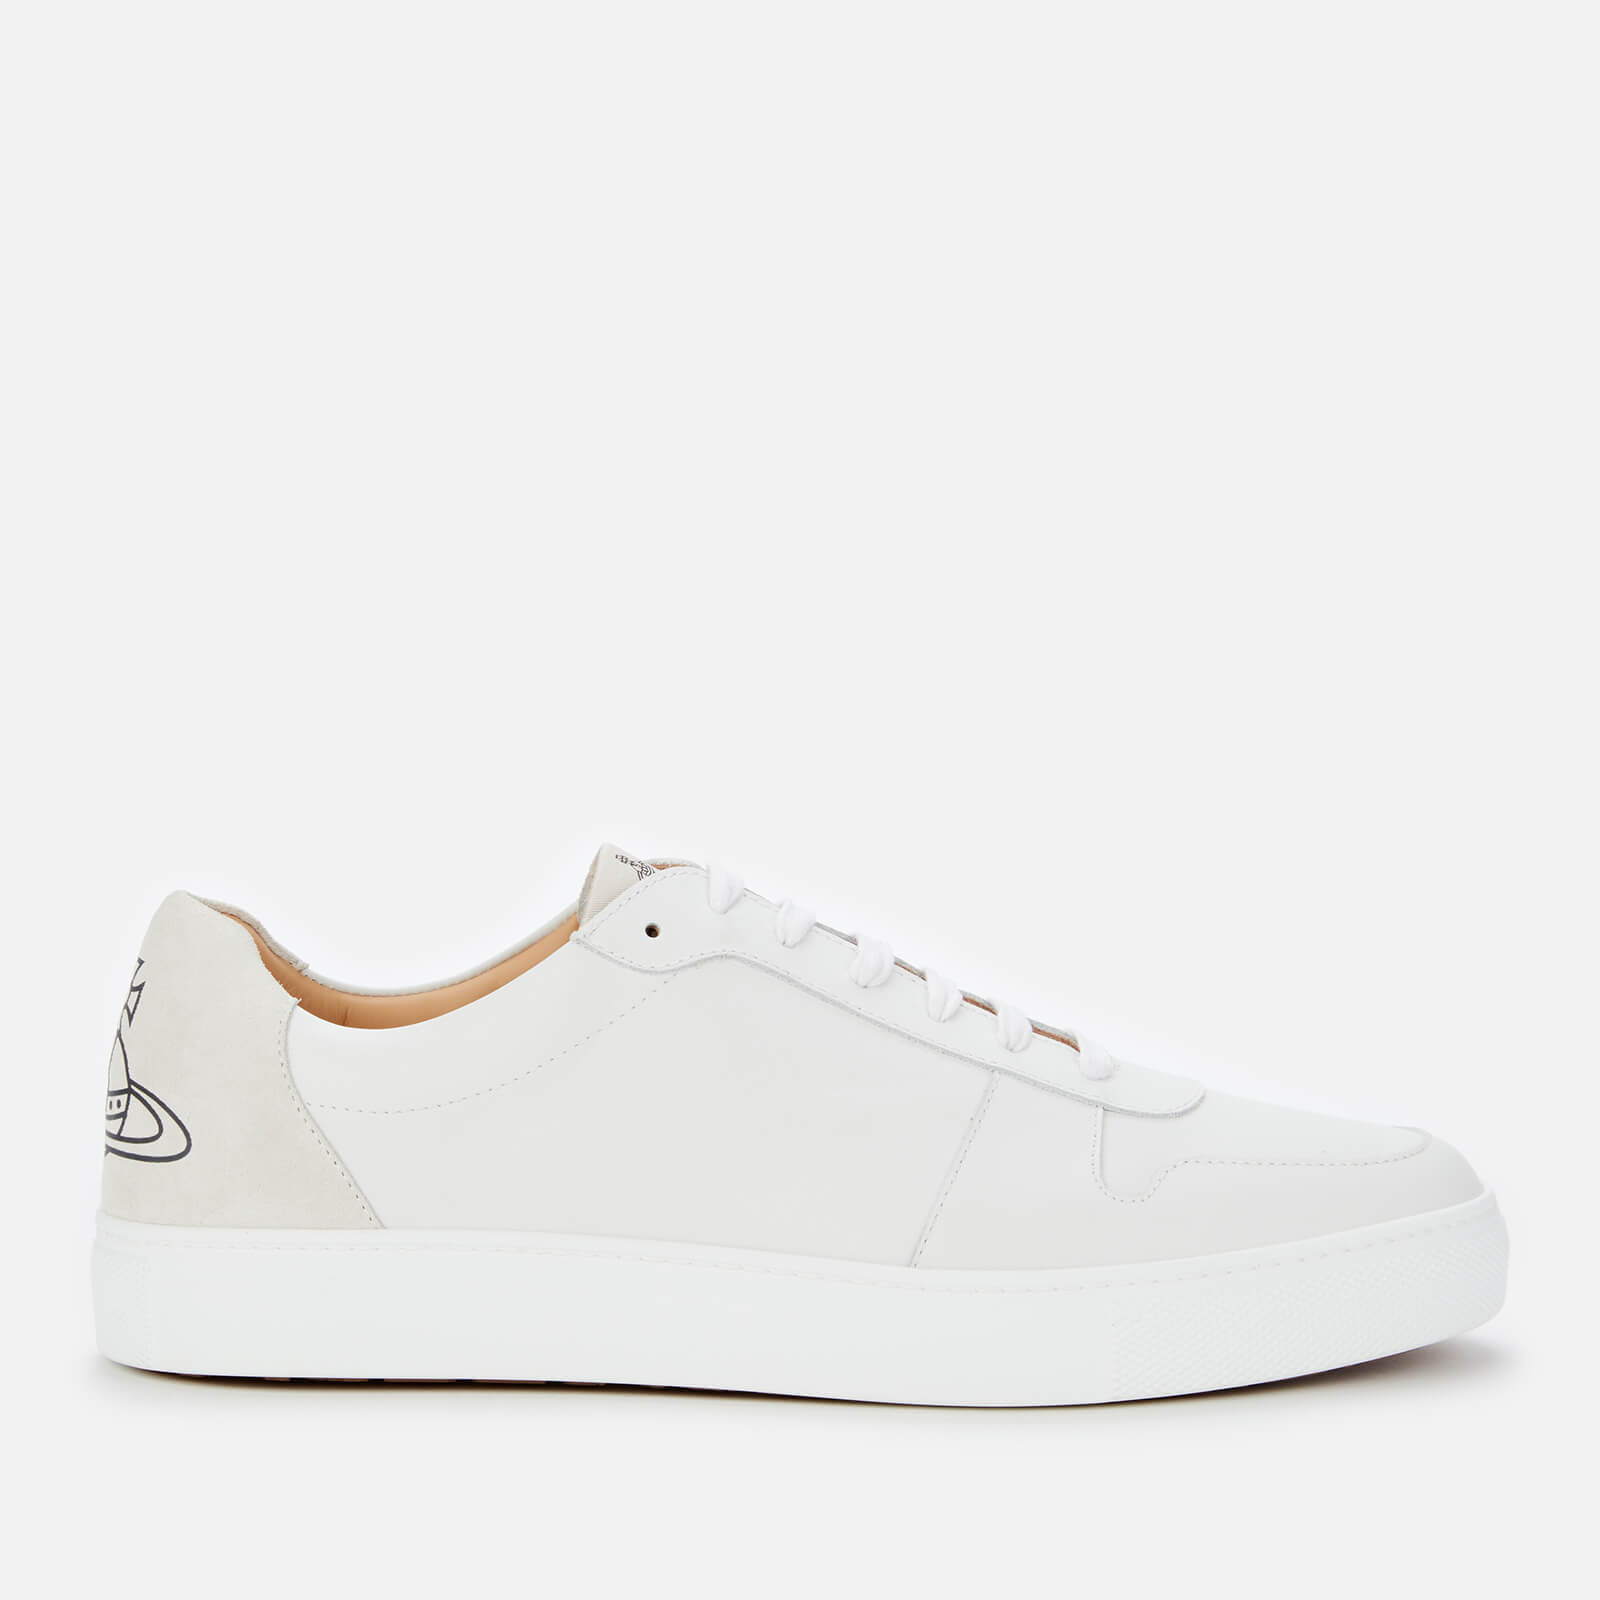 Vivienne Westwood Men's Apollo Leather Cupsole Trainers - White - UK 8